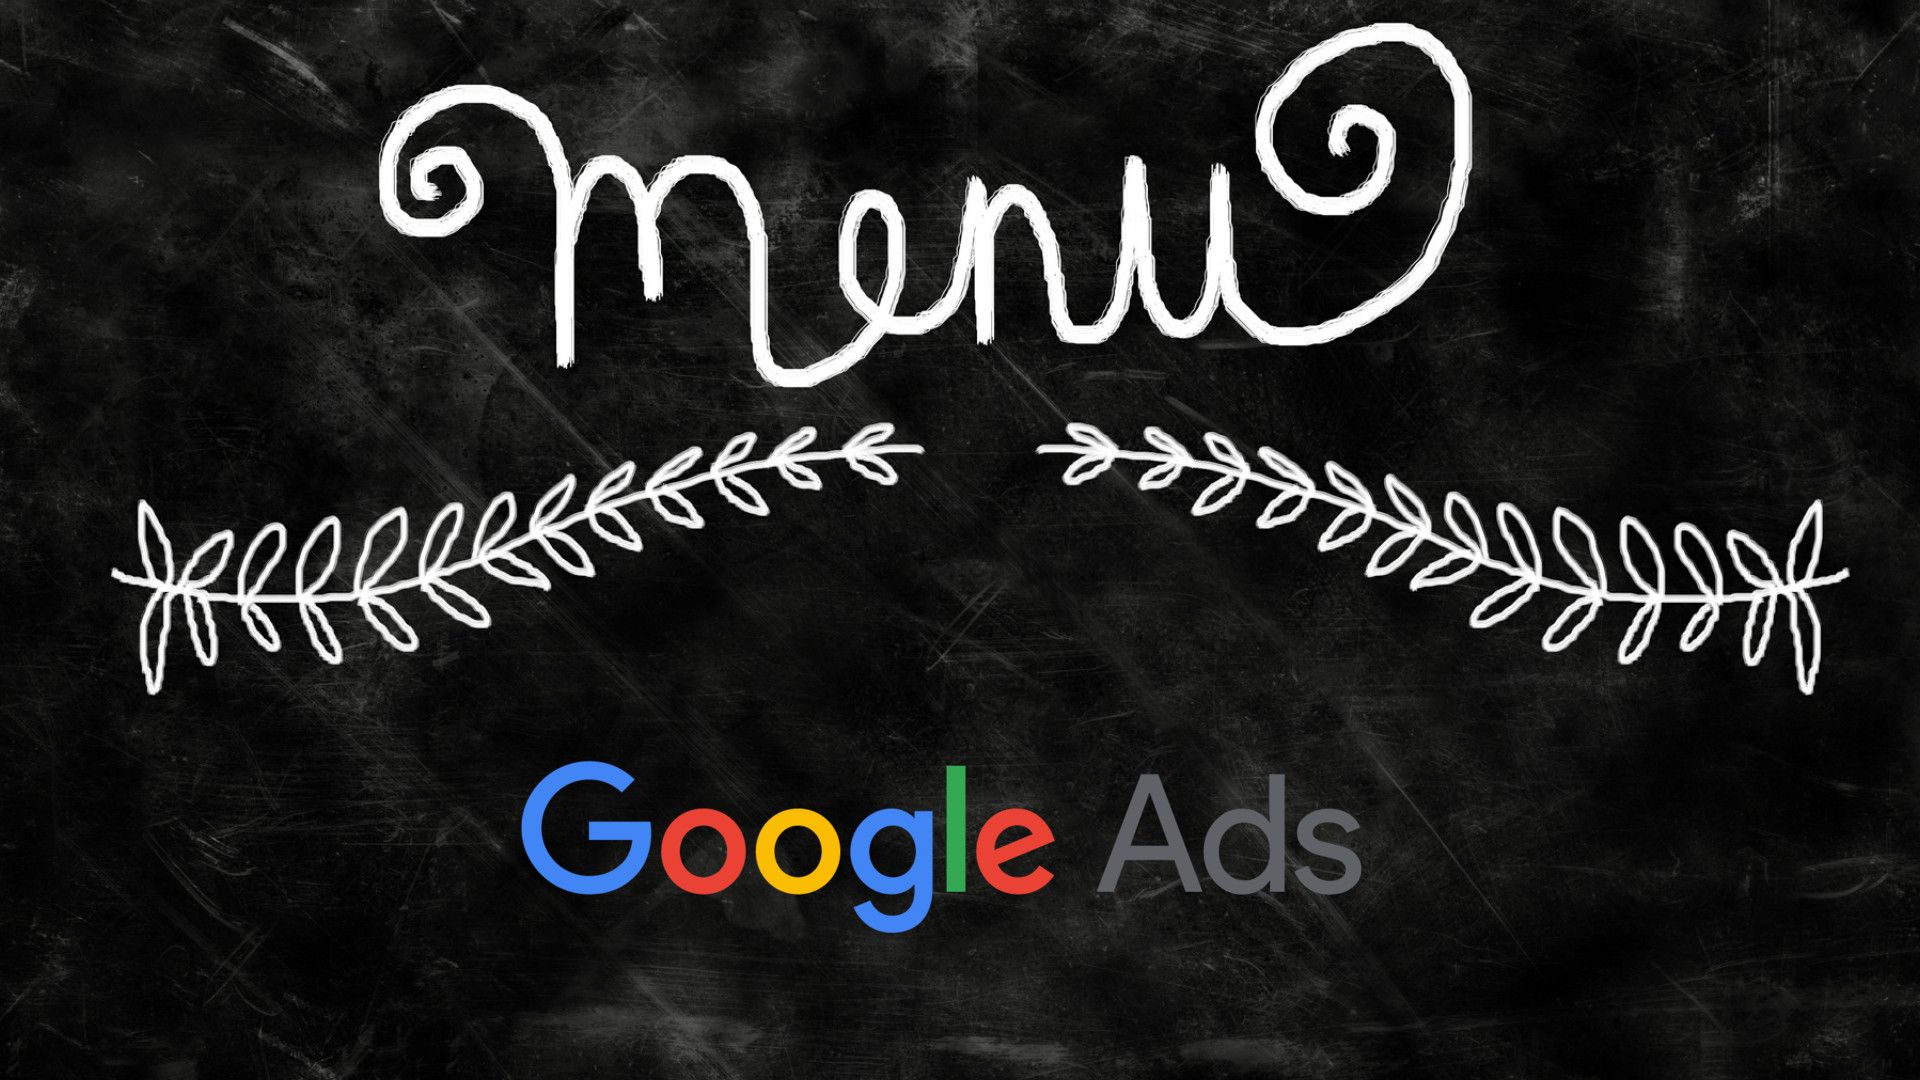 Retail and restaurants chains can now upload transactional data in Google Ads